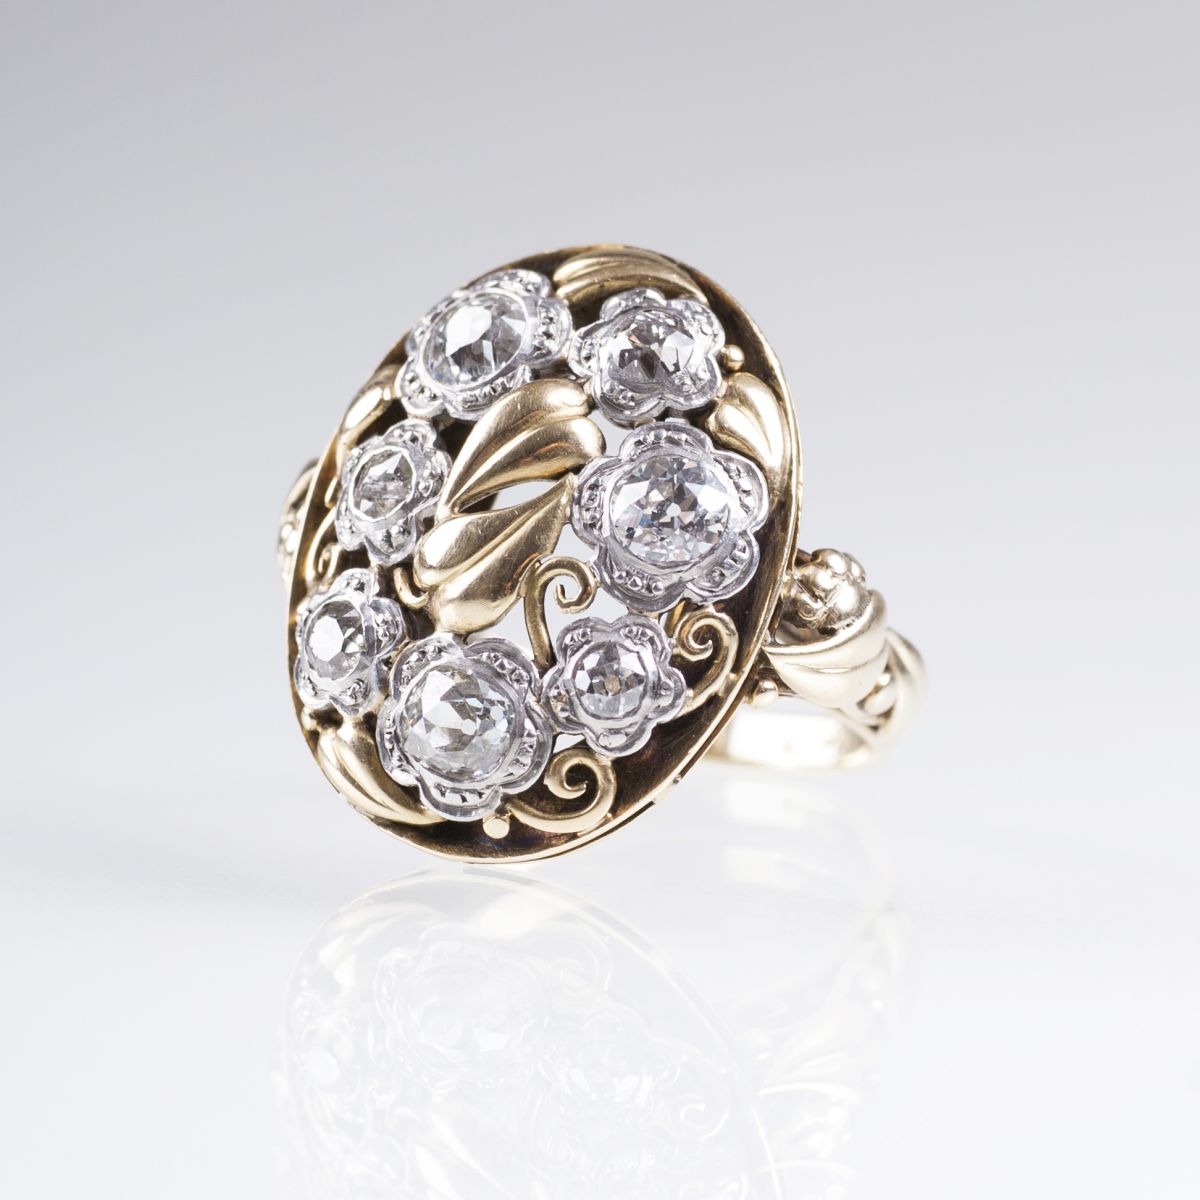 A Vintage diamond ring with flower ornaments